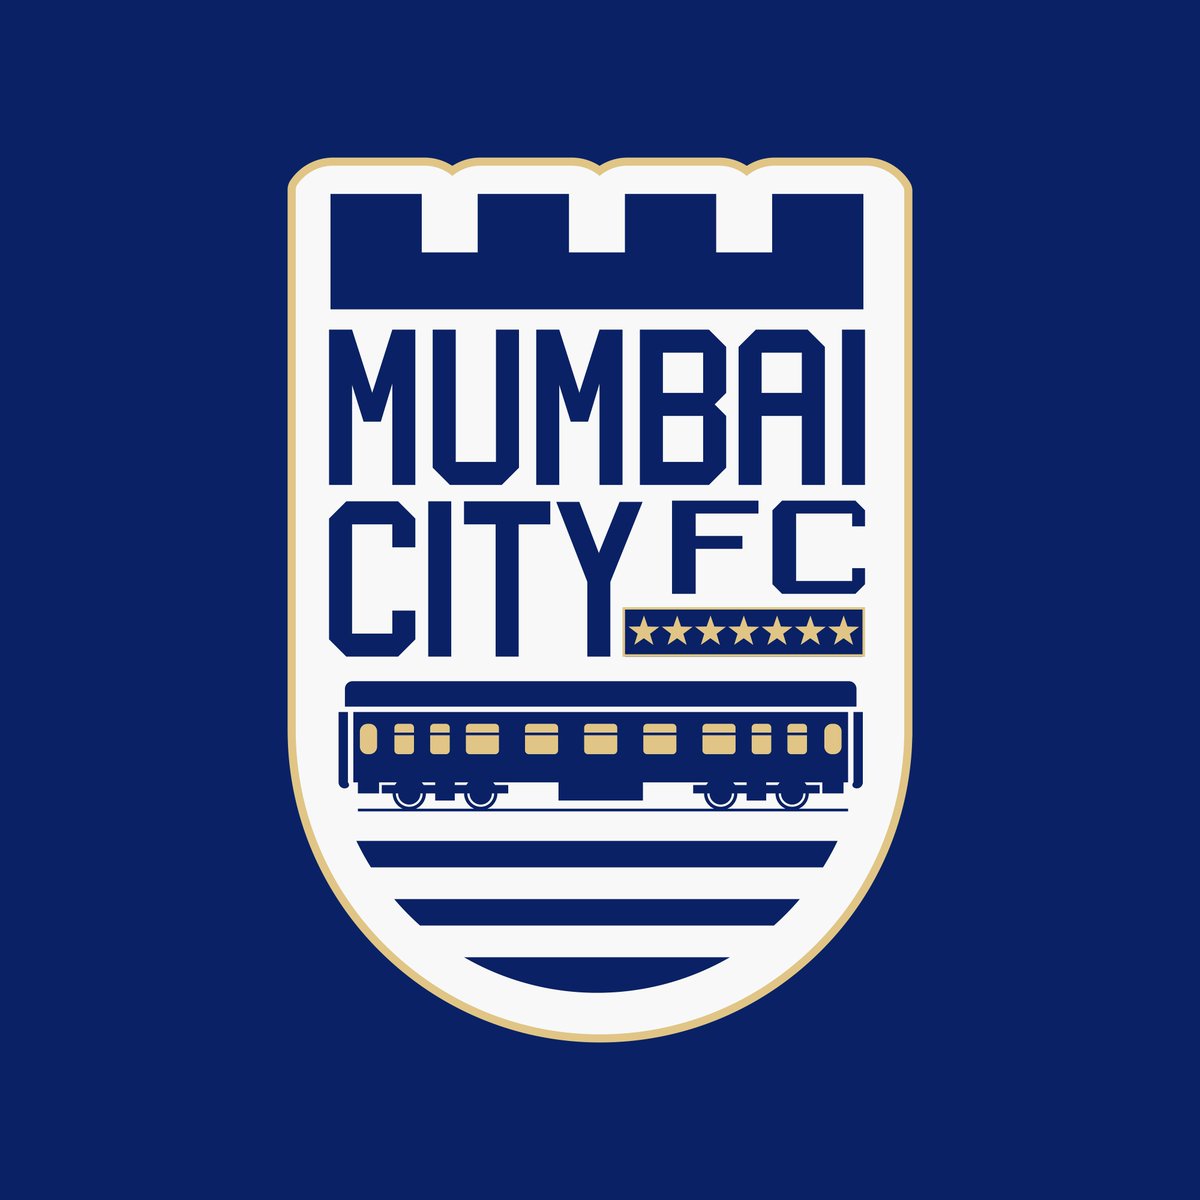 Manchester City City Football Group Is Delighted To Welcome Mumbai City Fc To Its Family Of Clubs Full Story T Co 4qtas5rdwy T Co Zsti2jxu77